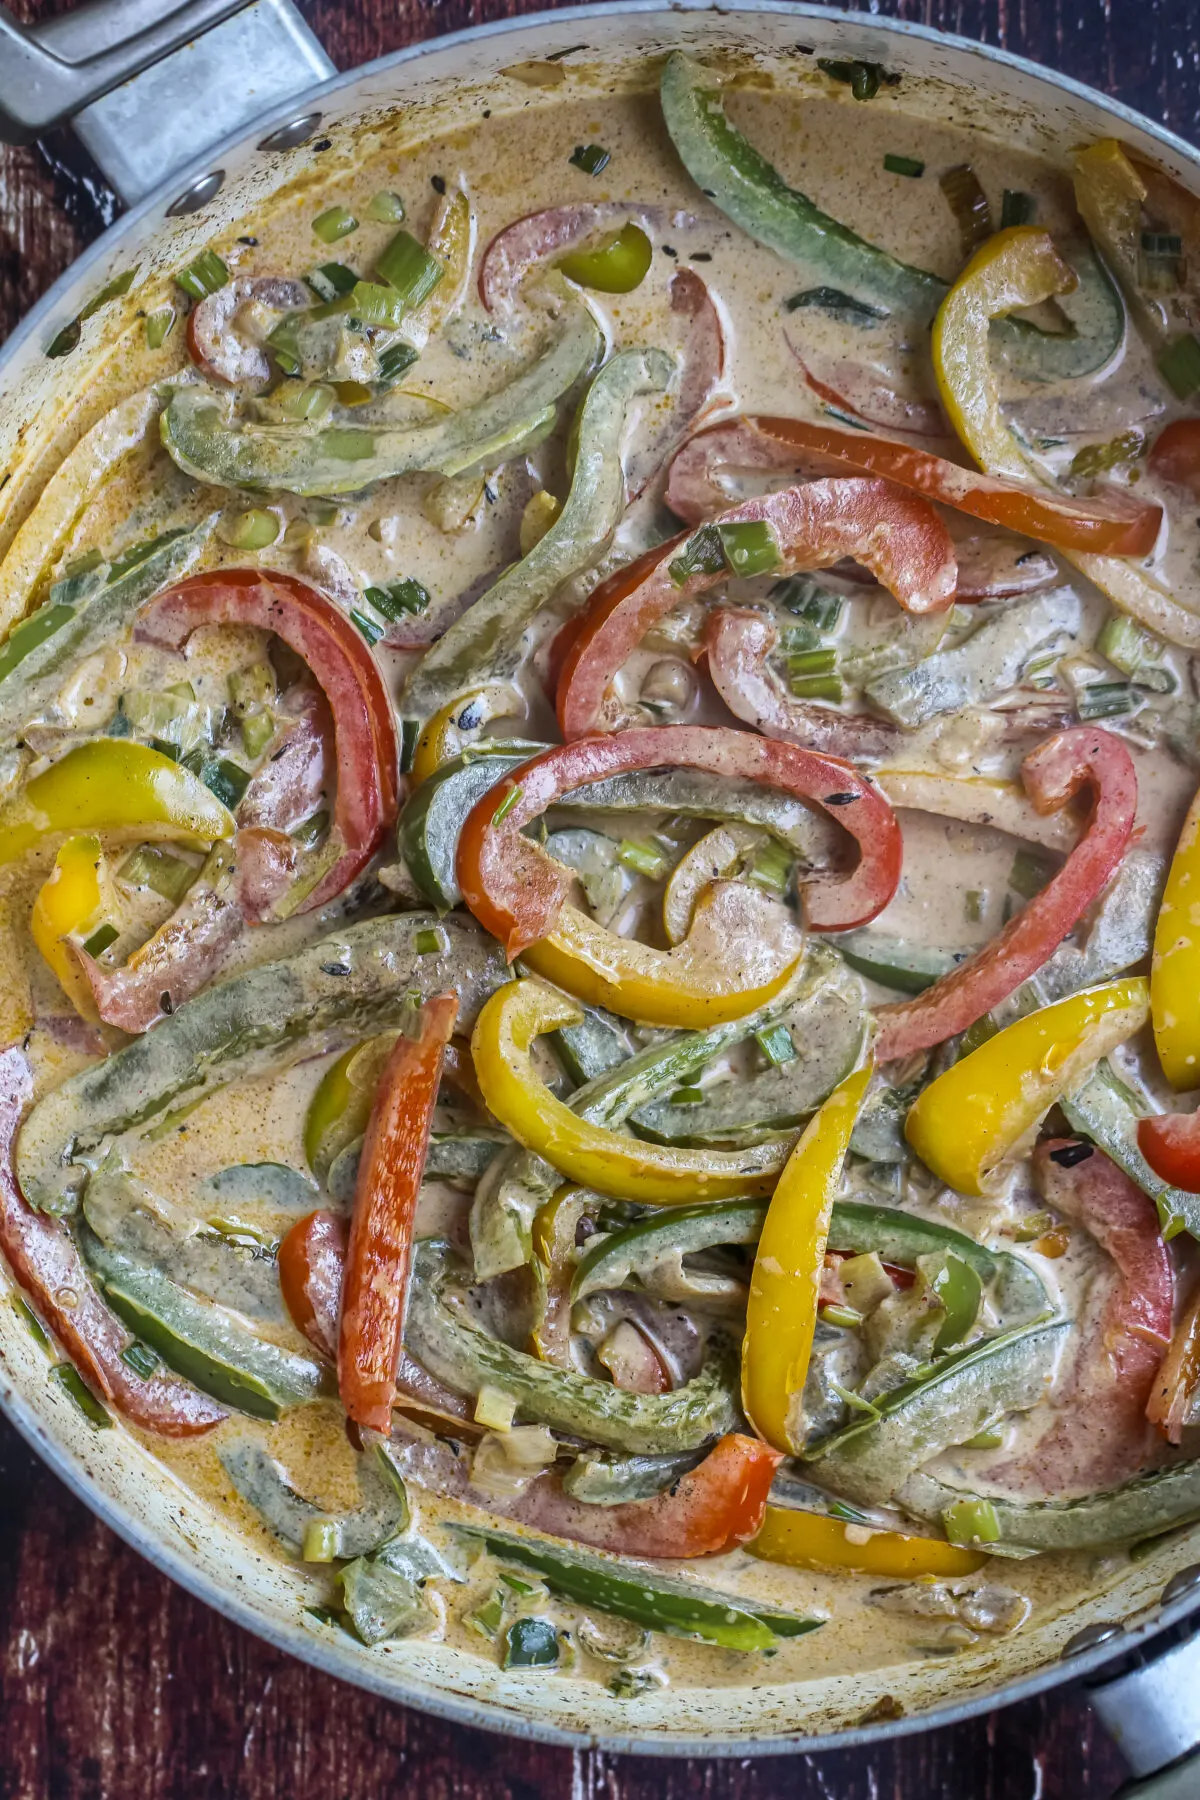 Sauteed peppers in cream sauce.